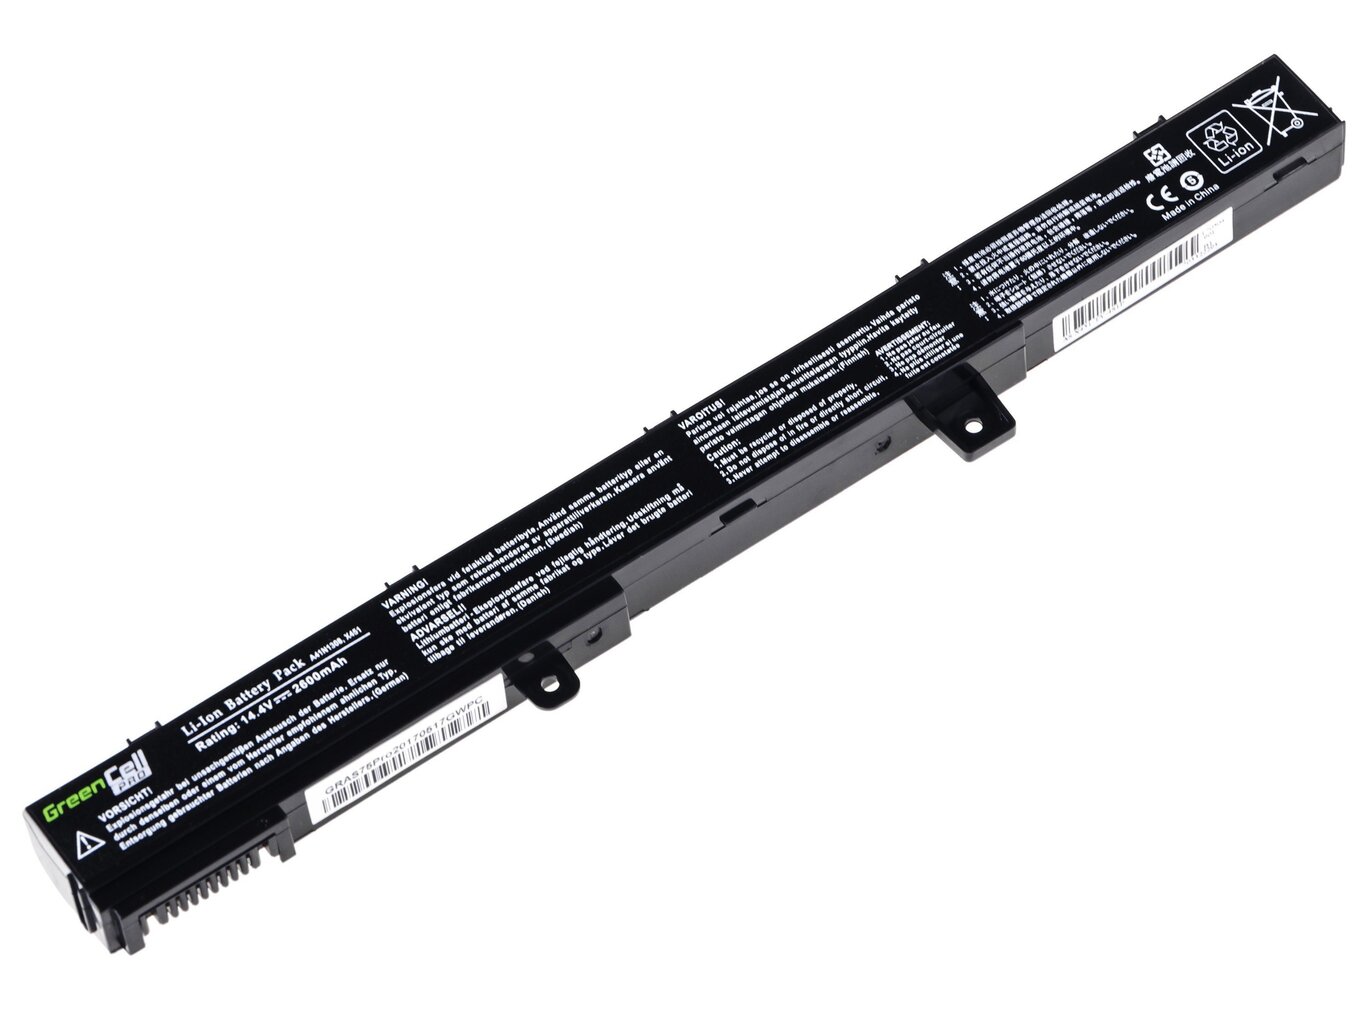 Green Cell Pro Laptop Battery for Asus X551 X551C X551CA X551M X551MA X551MAV R512C R512CA цена и информация | Sülearvuti akud | hansapost.ee